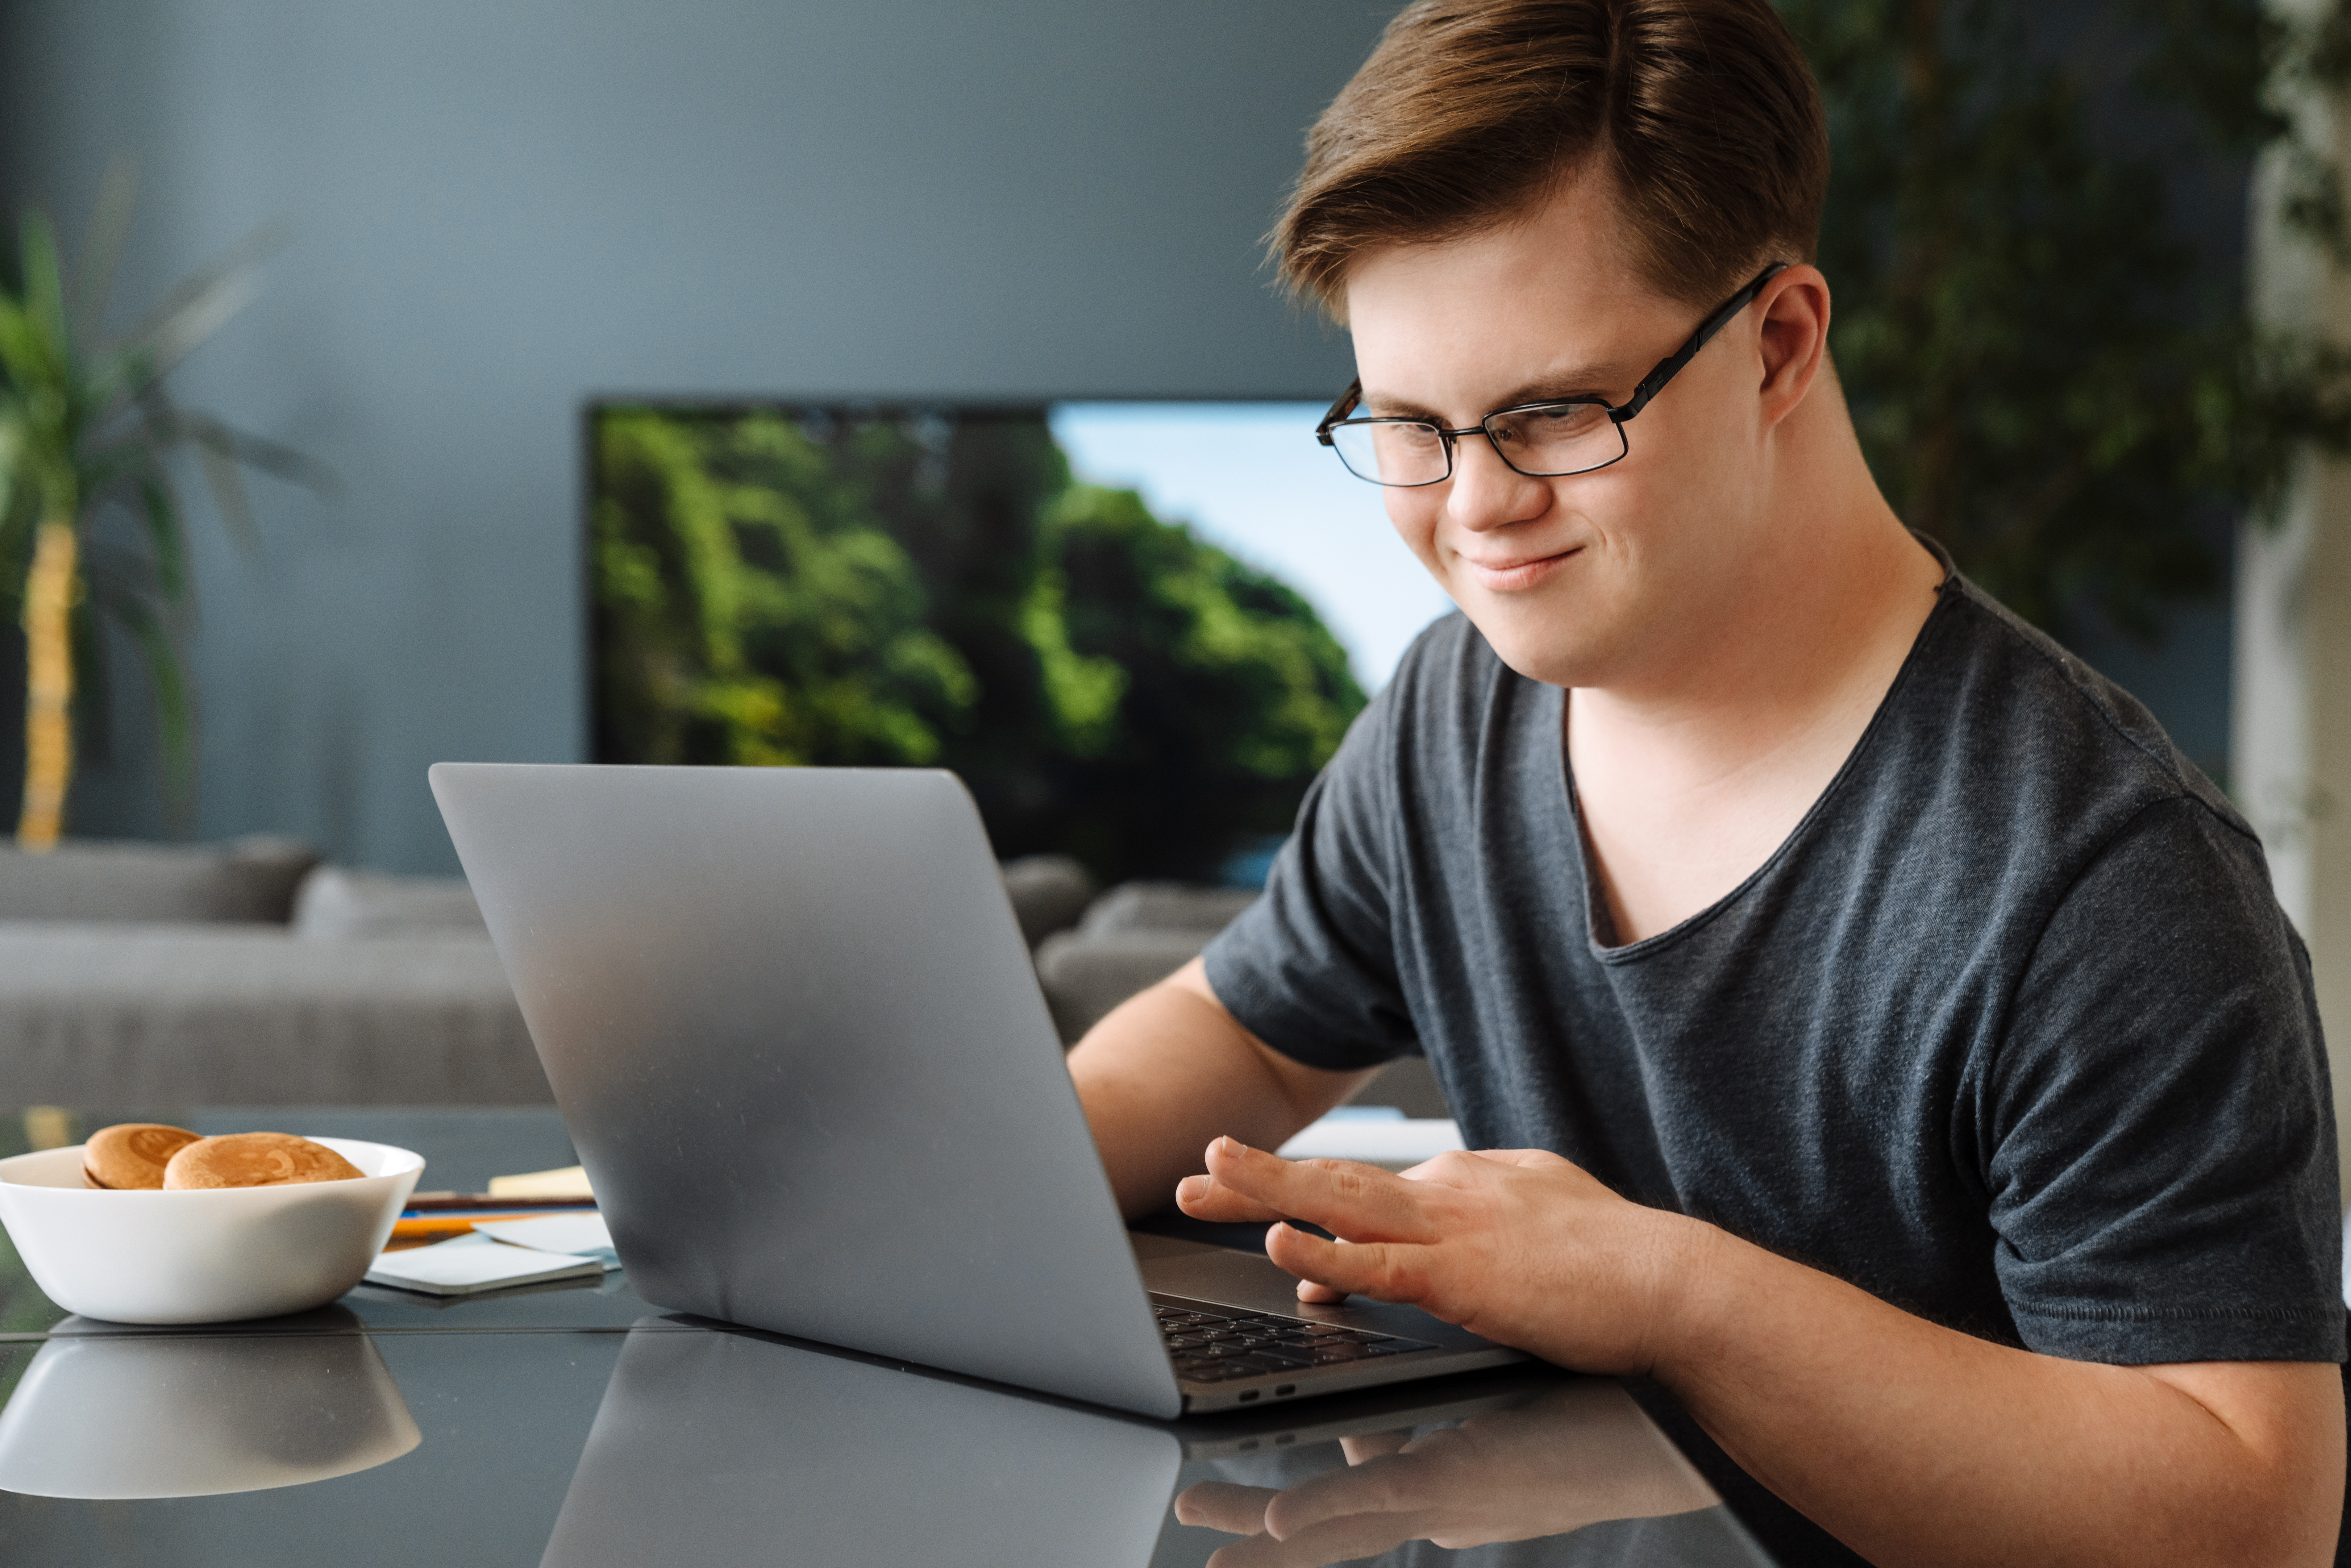 Man with Down syndrome working on his laptop. | Source: Shutterstock